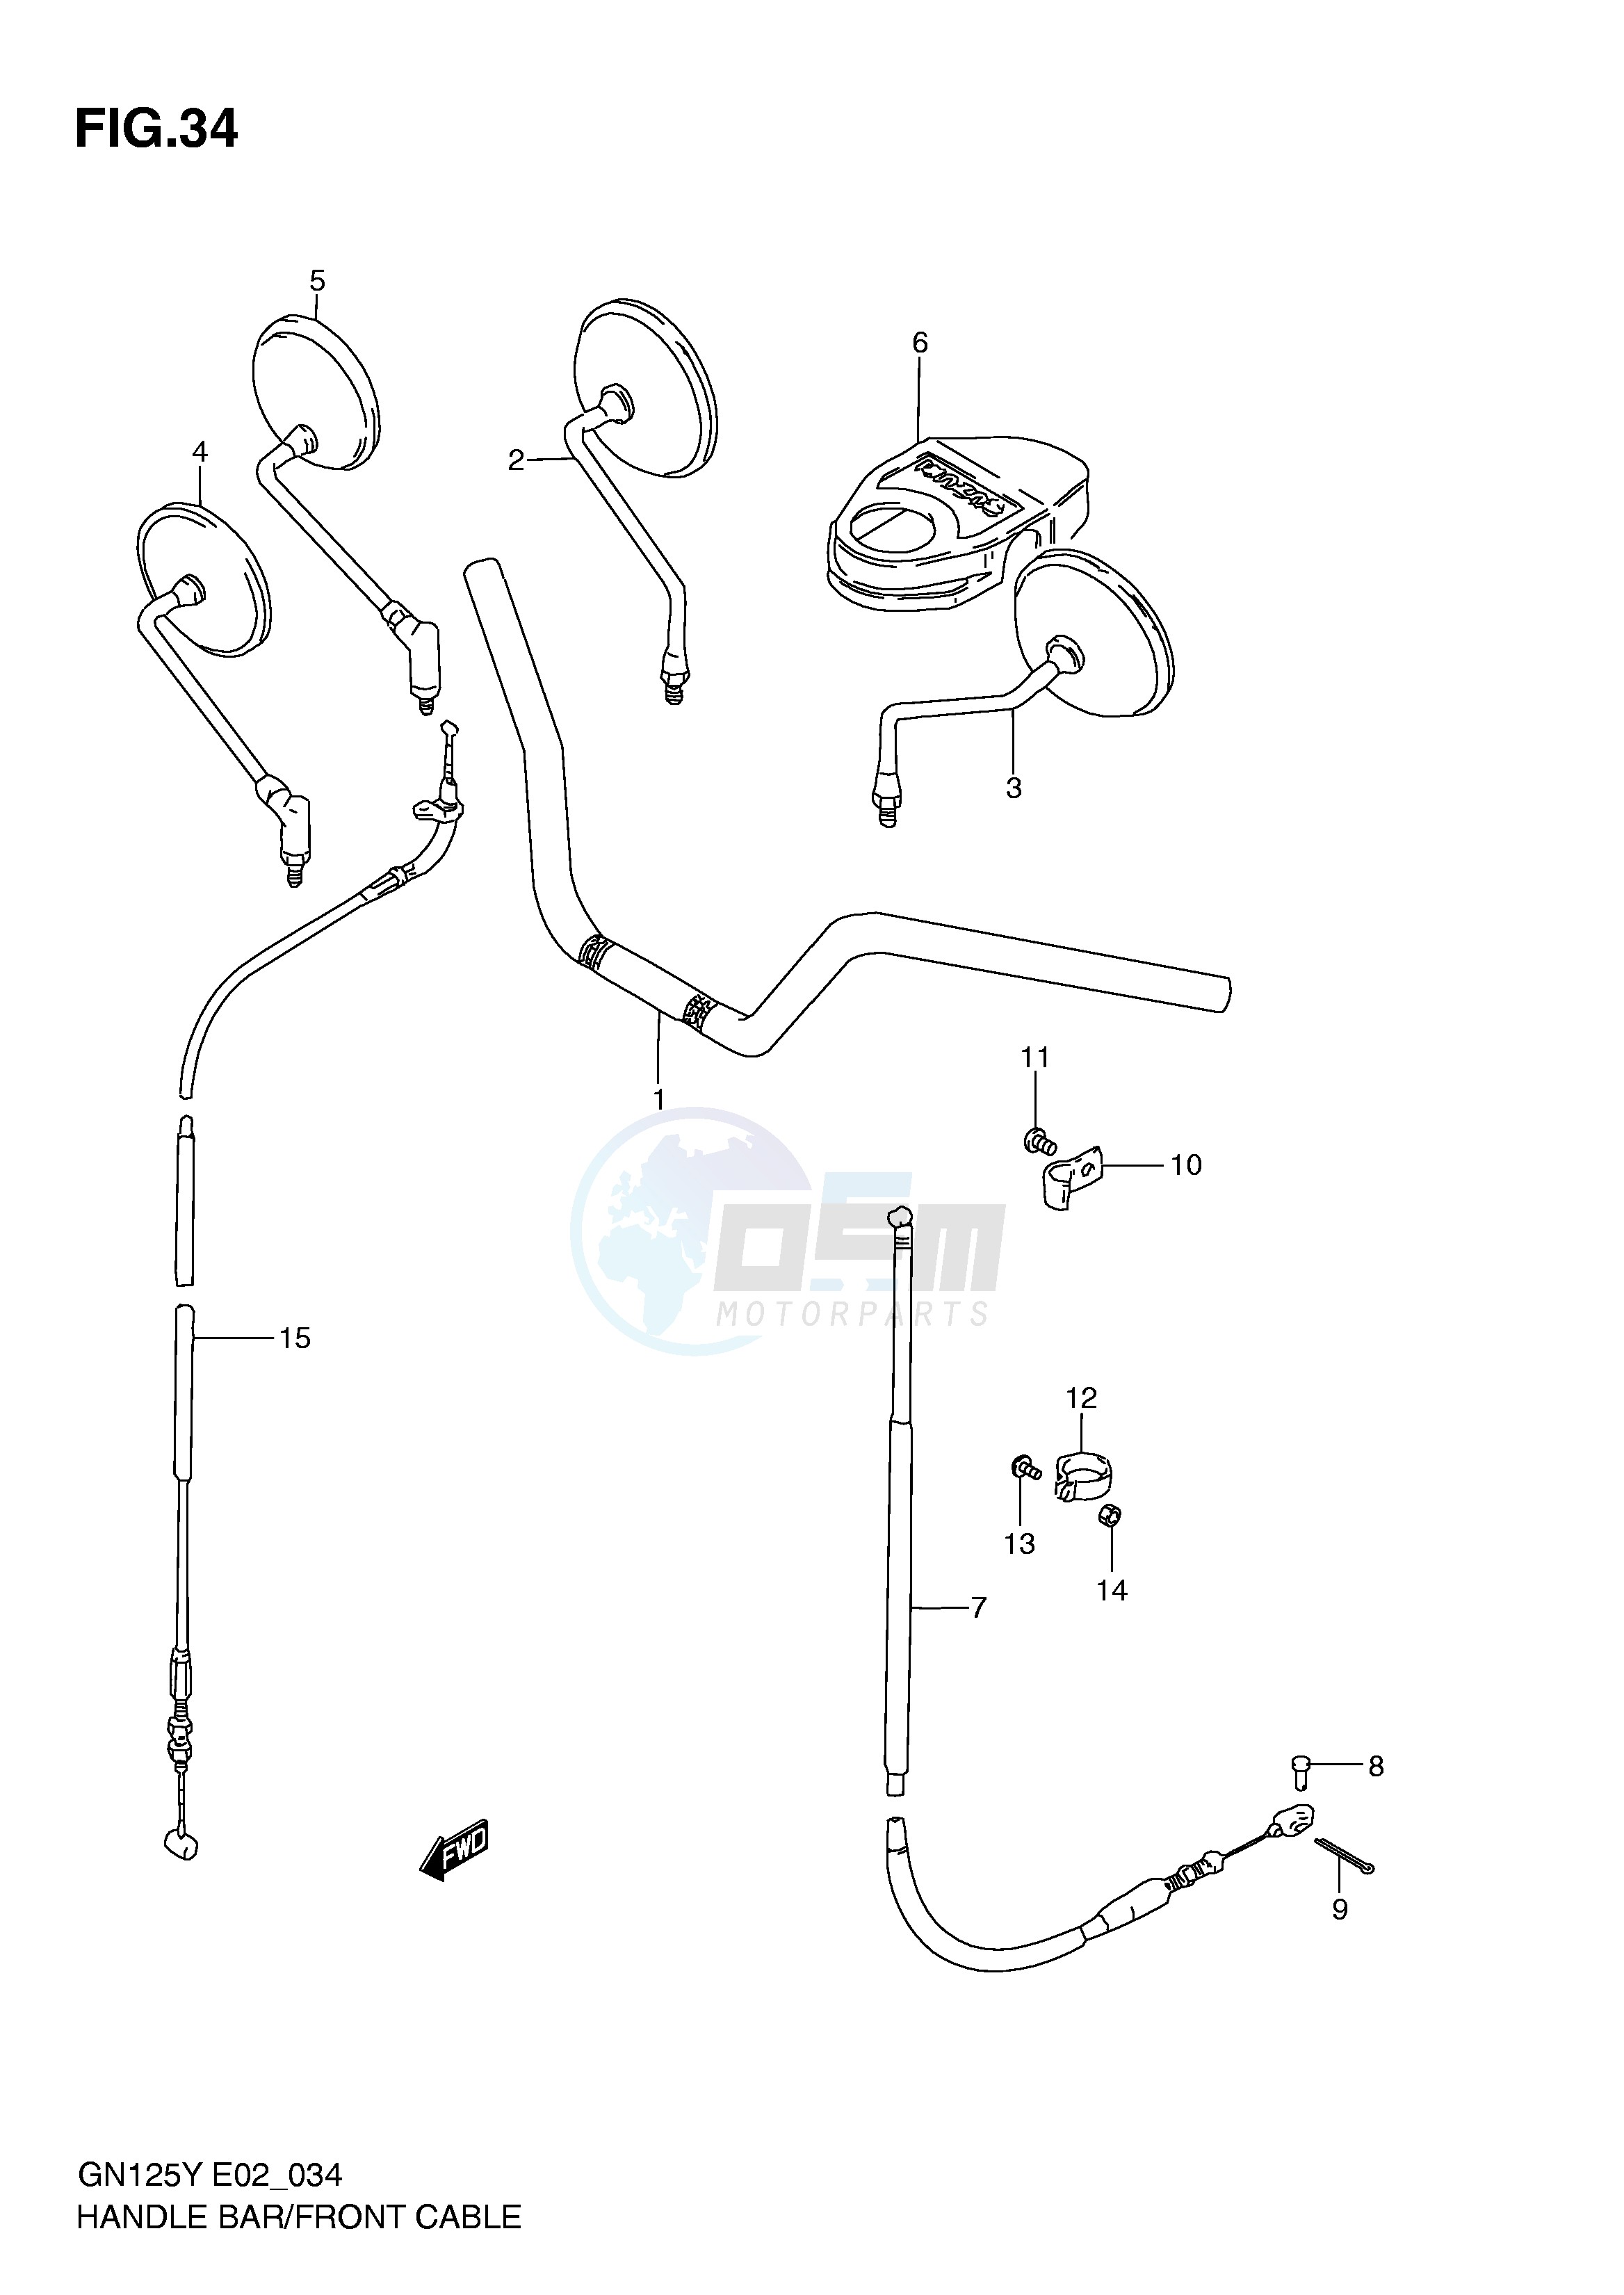 HANDLEBAR - FRONT CABLE blueprint